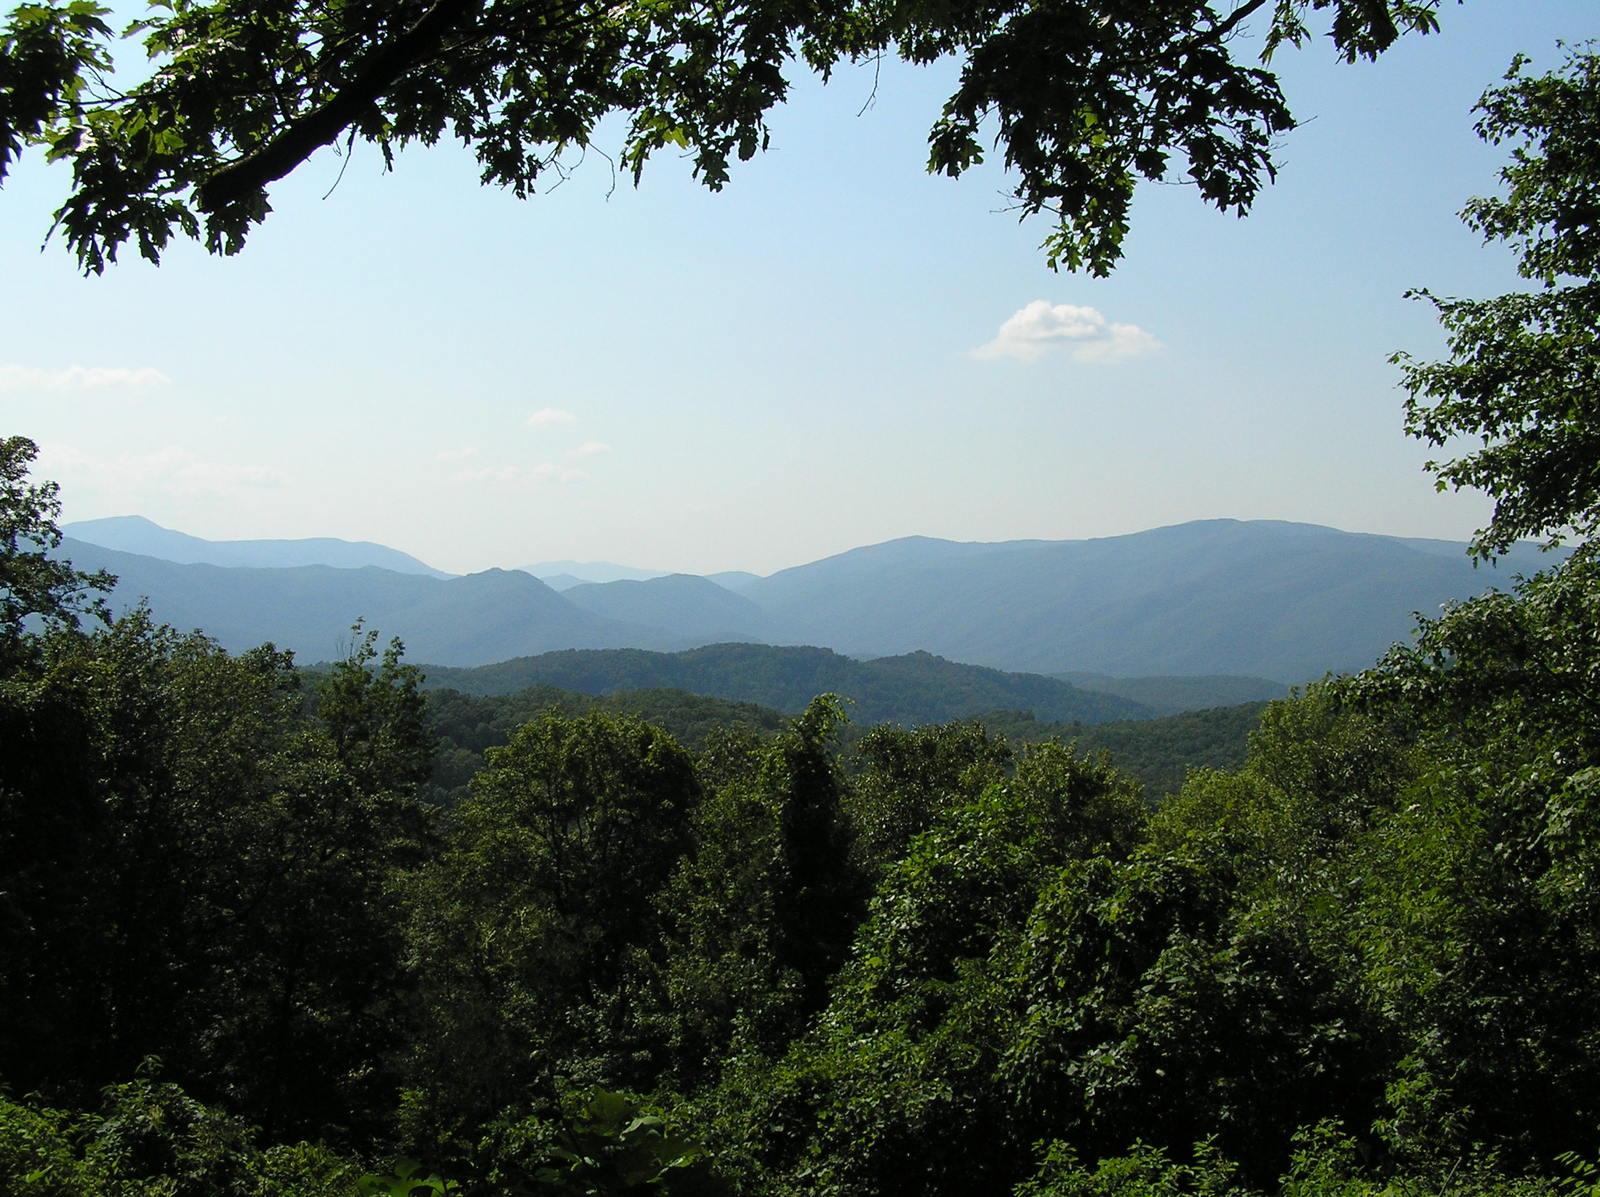 The Perfect Honeymoon in The Smoky Mountains